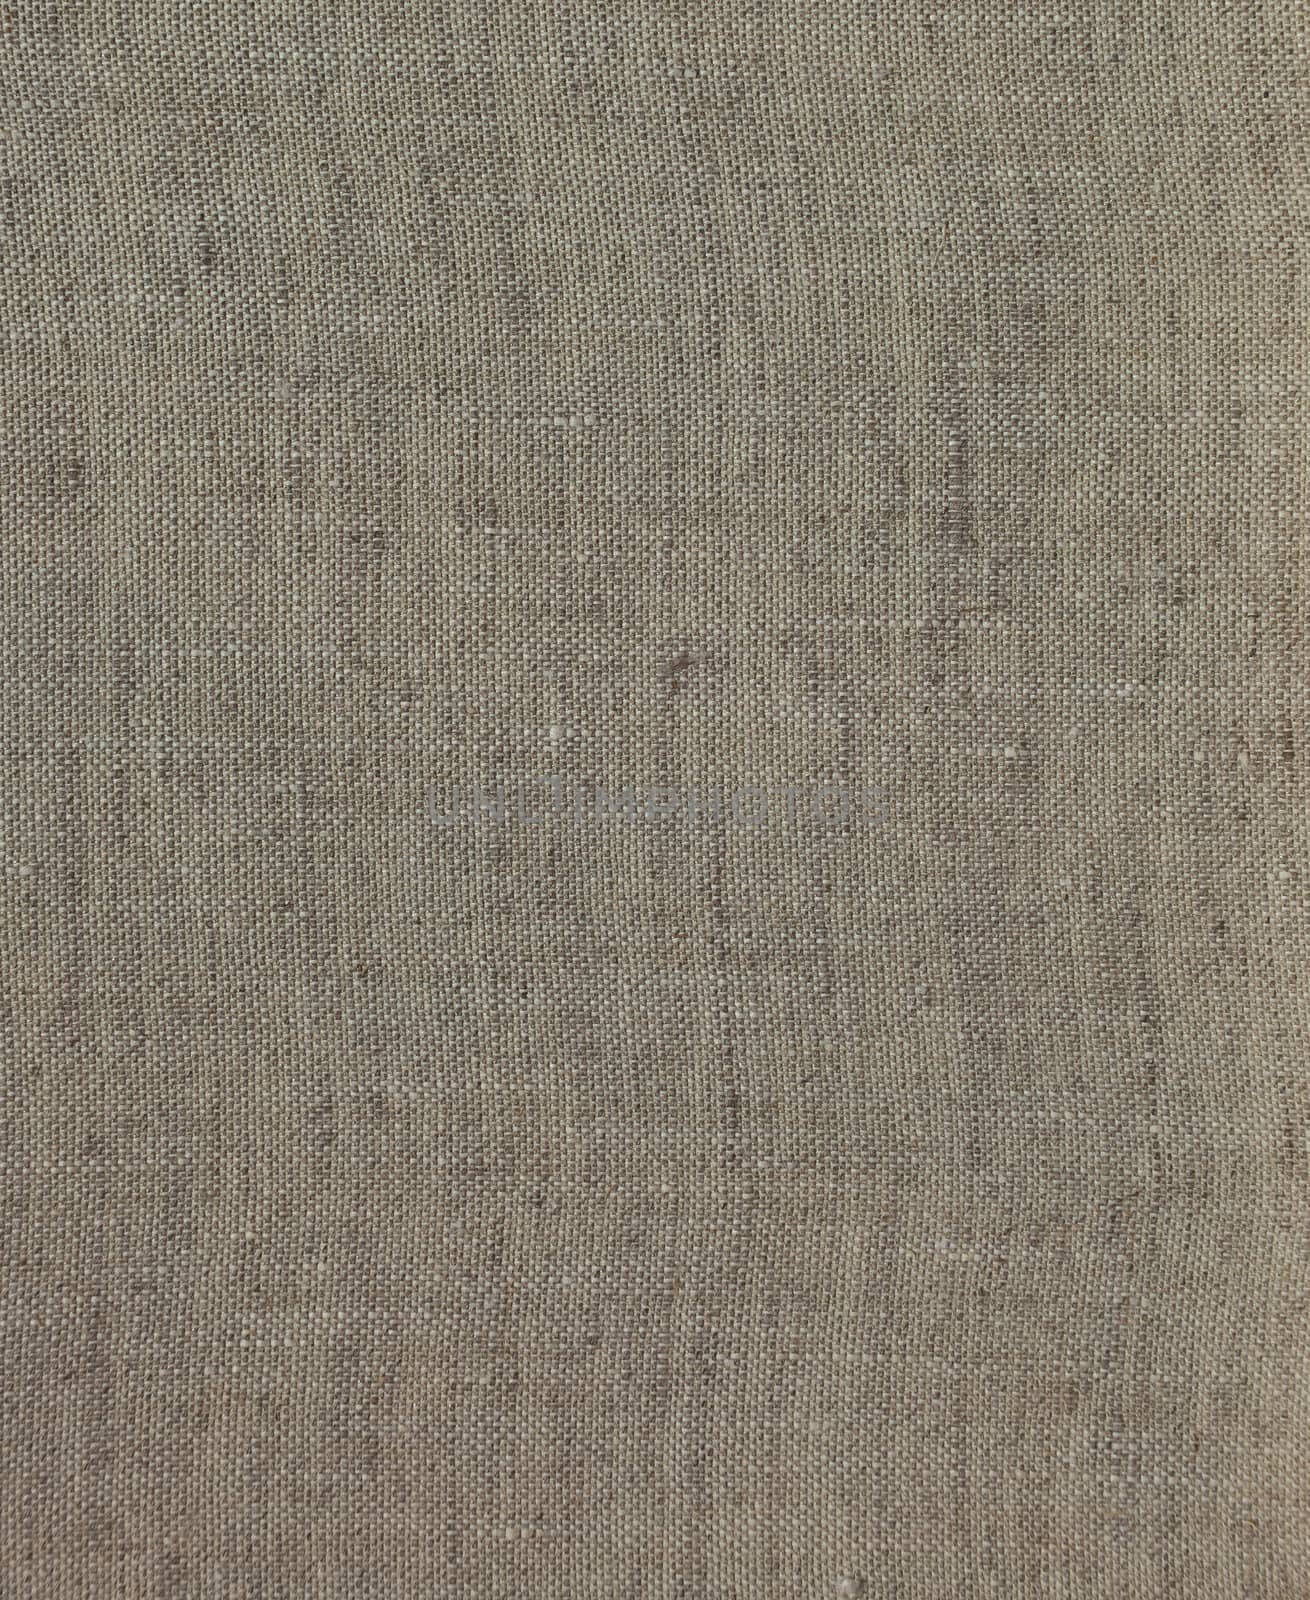 Fine texture of linen canvas fabric background 